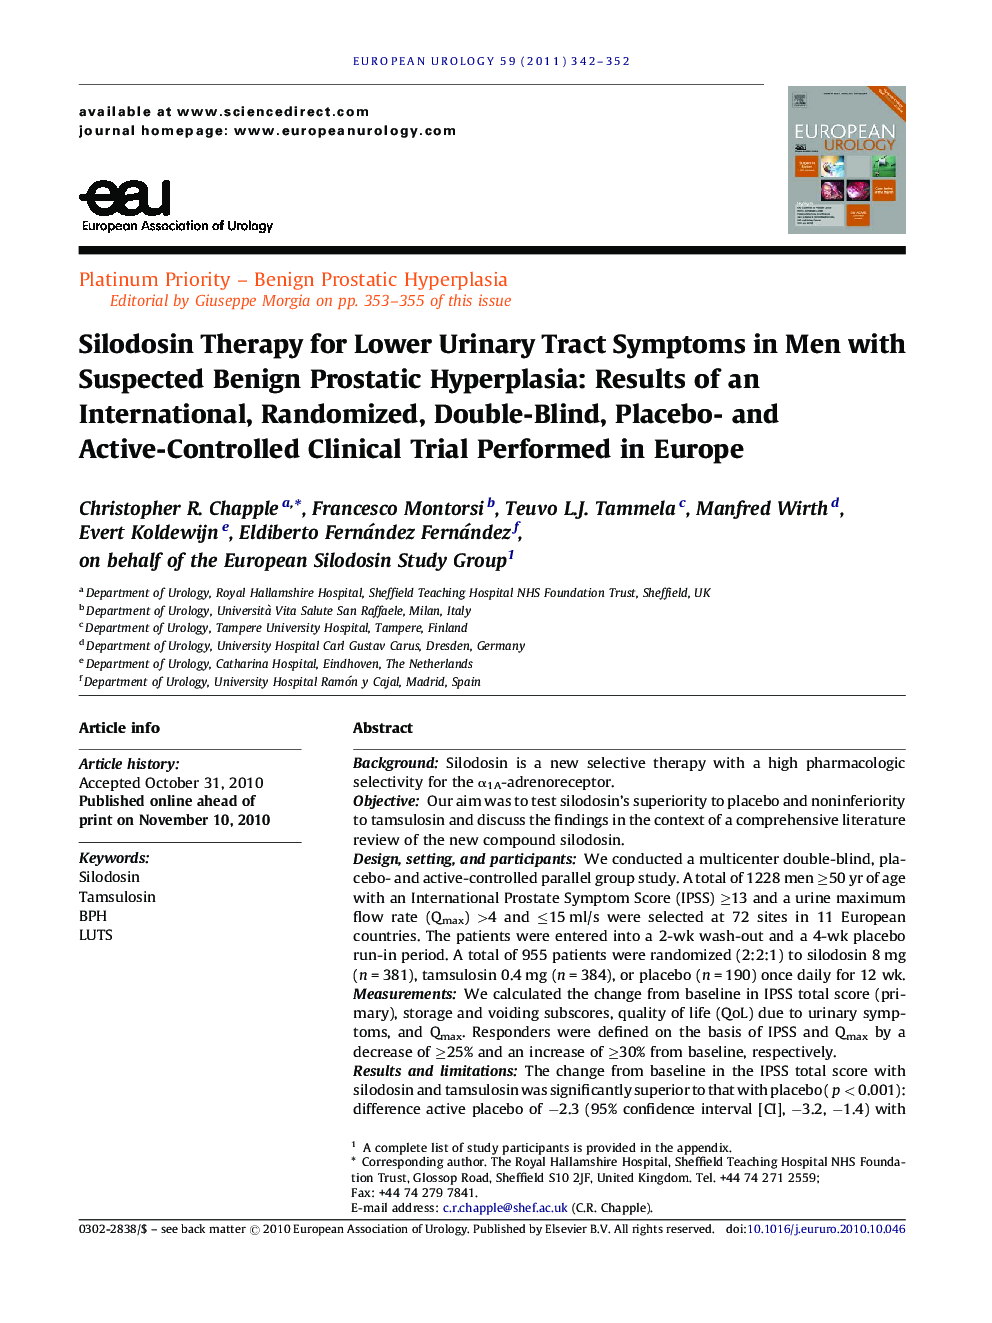 Silodosin Therapy for Lower Urinary Tract Symptoms in Men with Suspected Benign Prostatic Hyperplasia: Results of an International, Randomized, Double-Blind, Placebo- and Active-Controlled Clinical Trial Performed in Europe